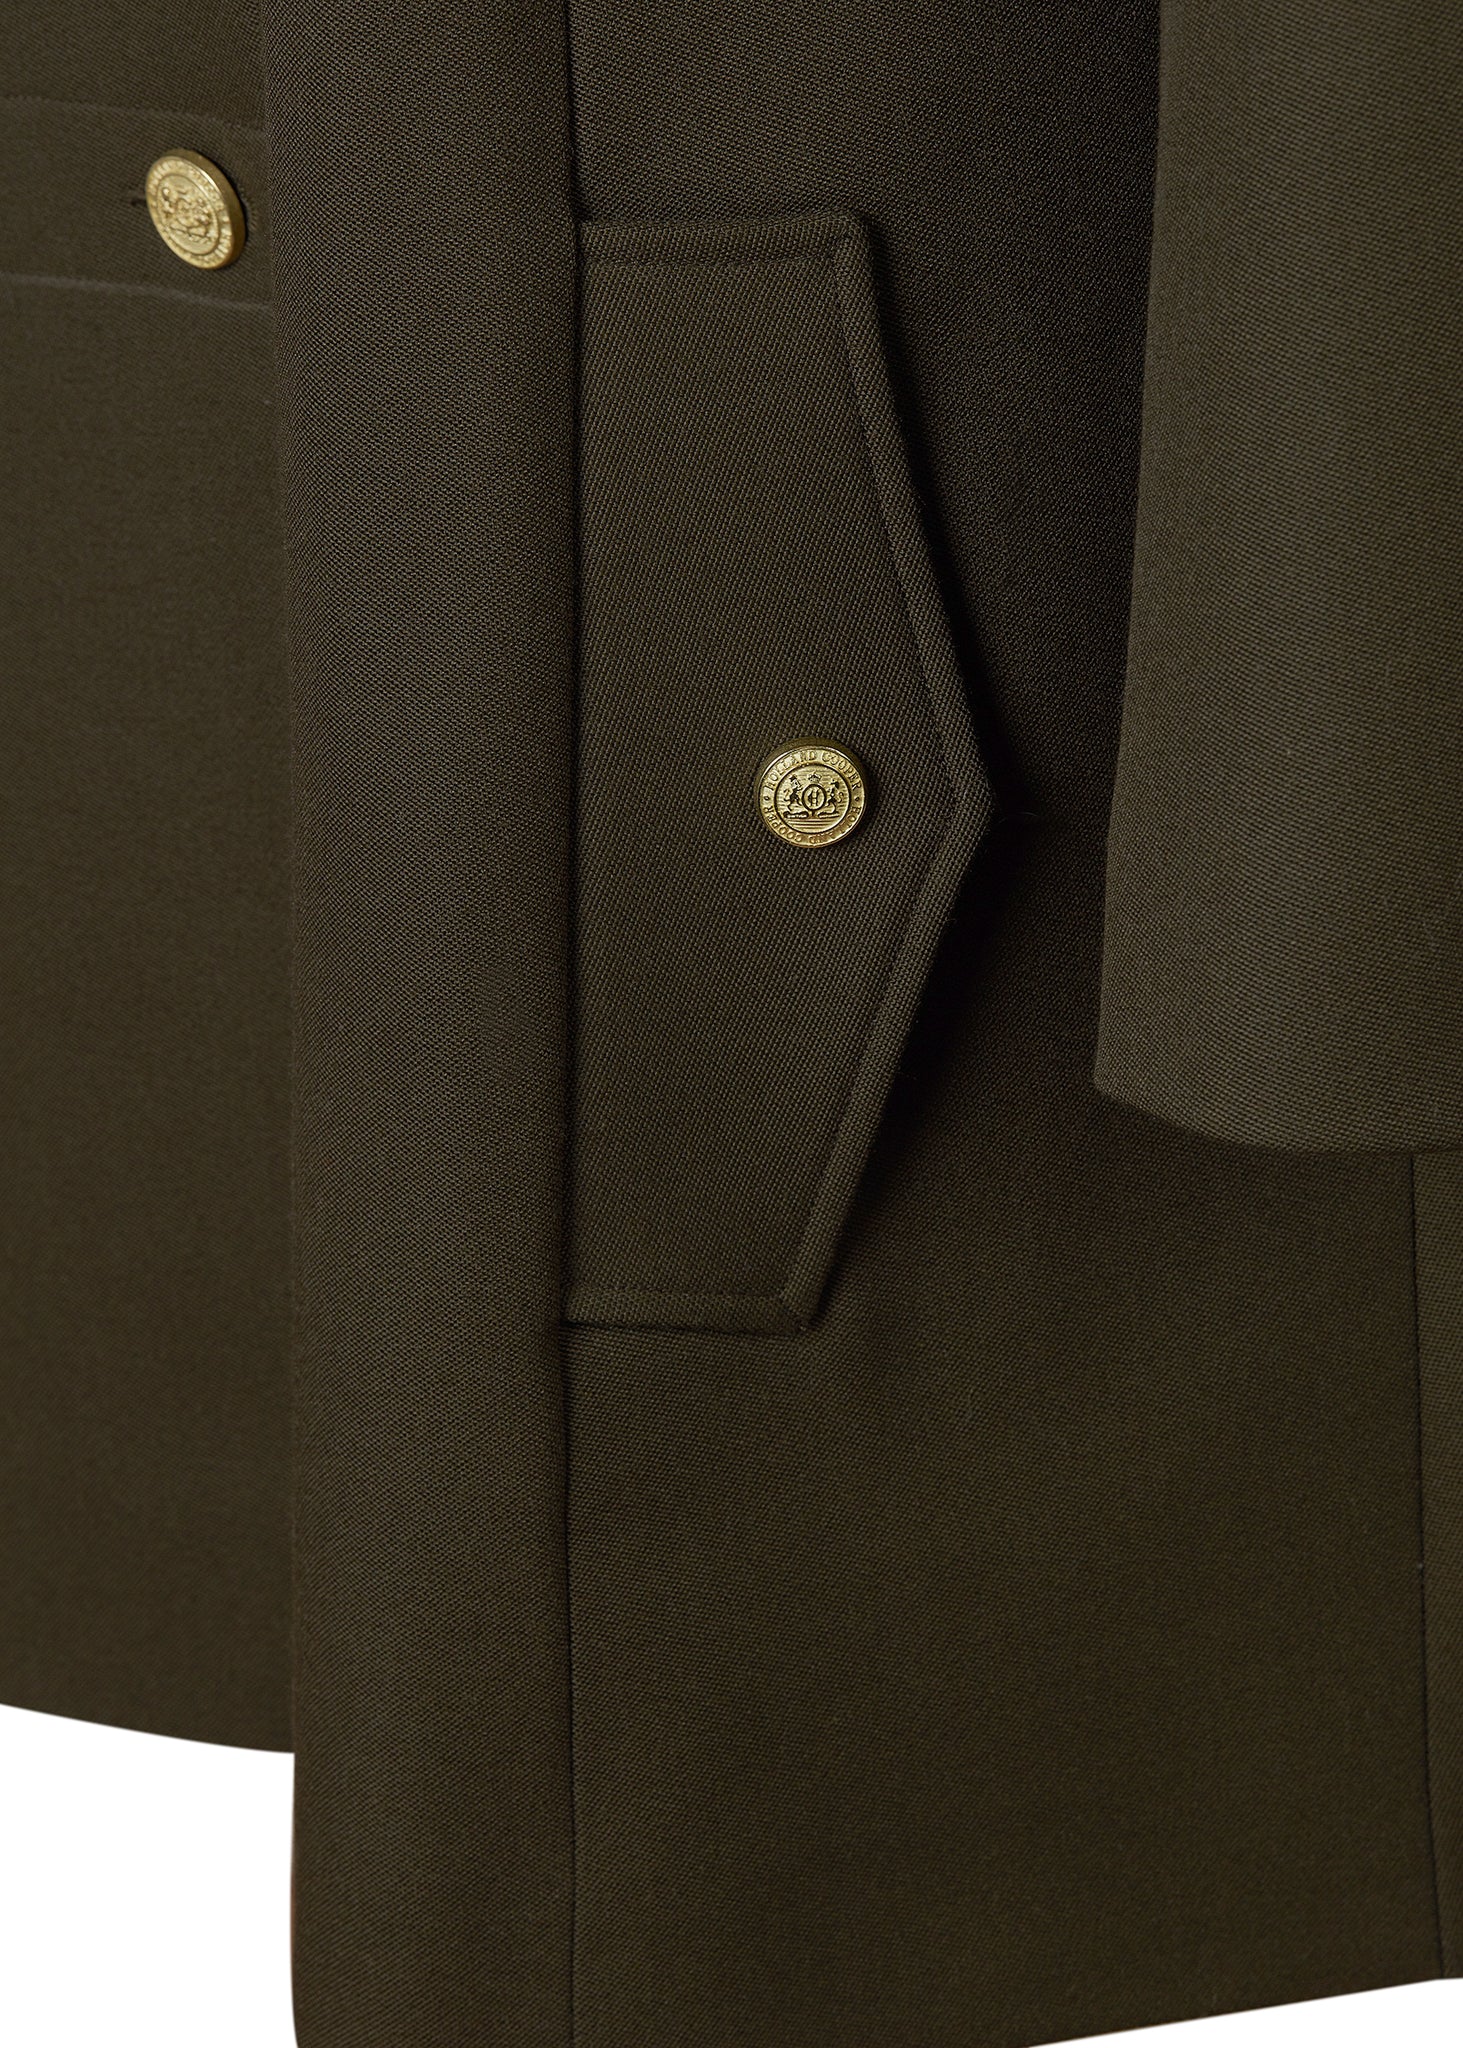 Pocket detail of Womens khaki front buttoned tweed cape coat